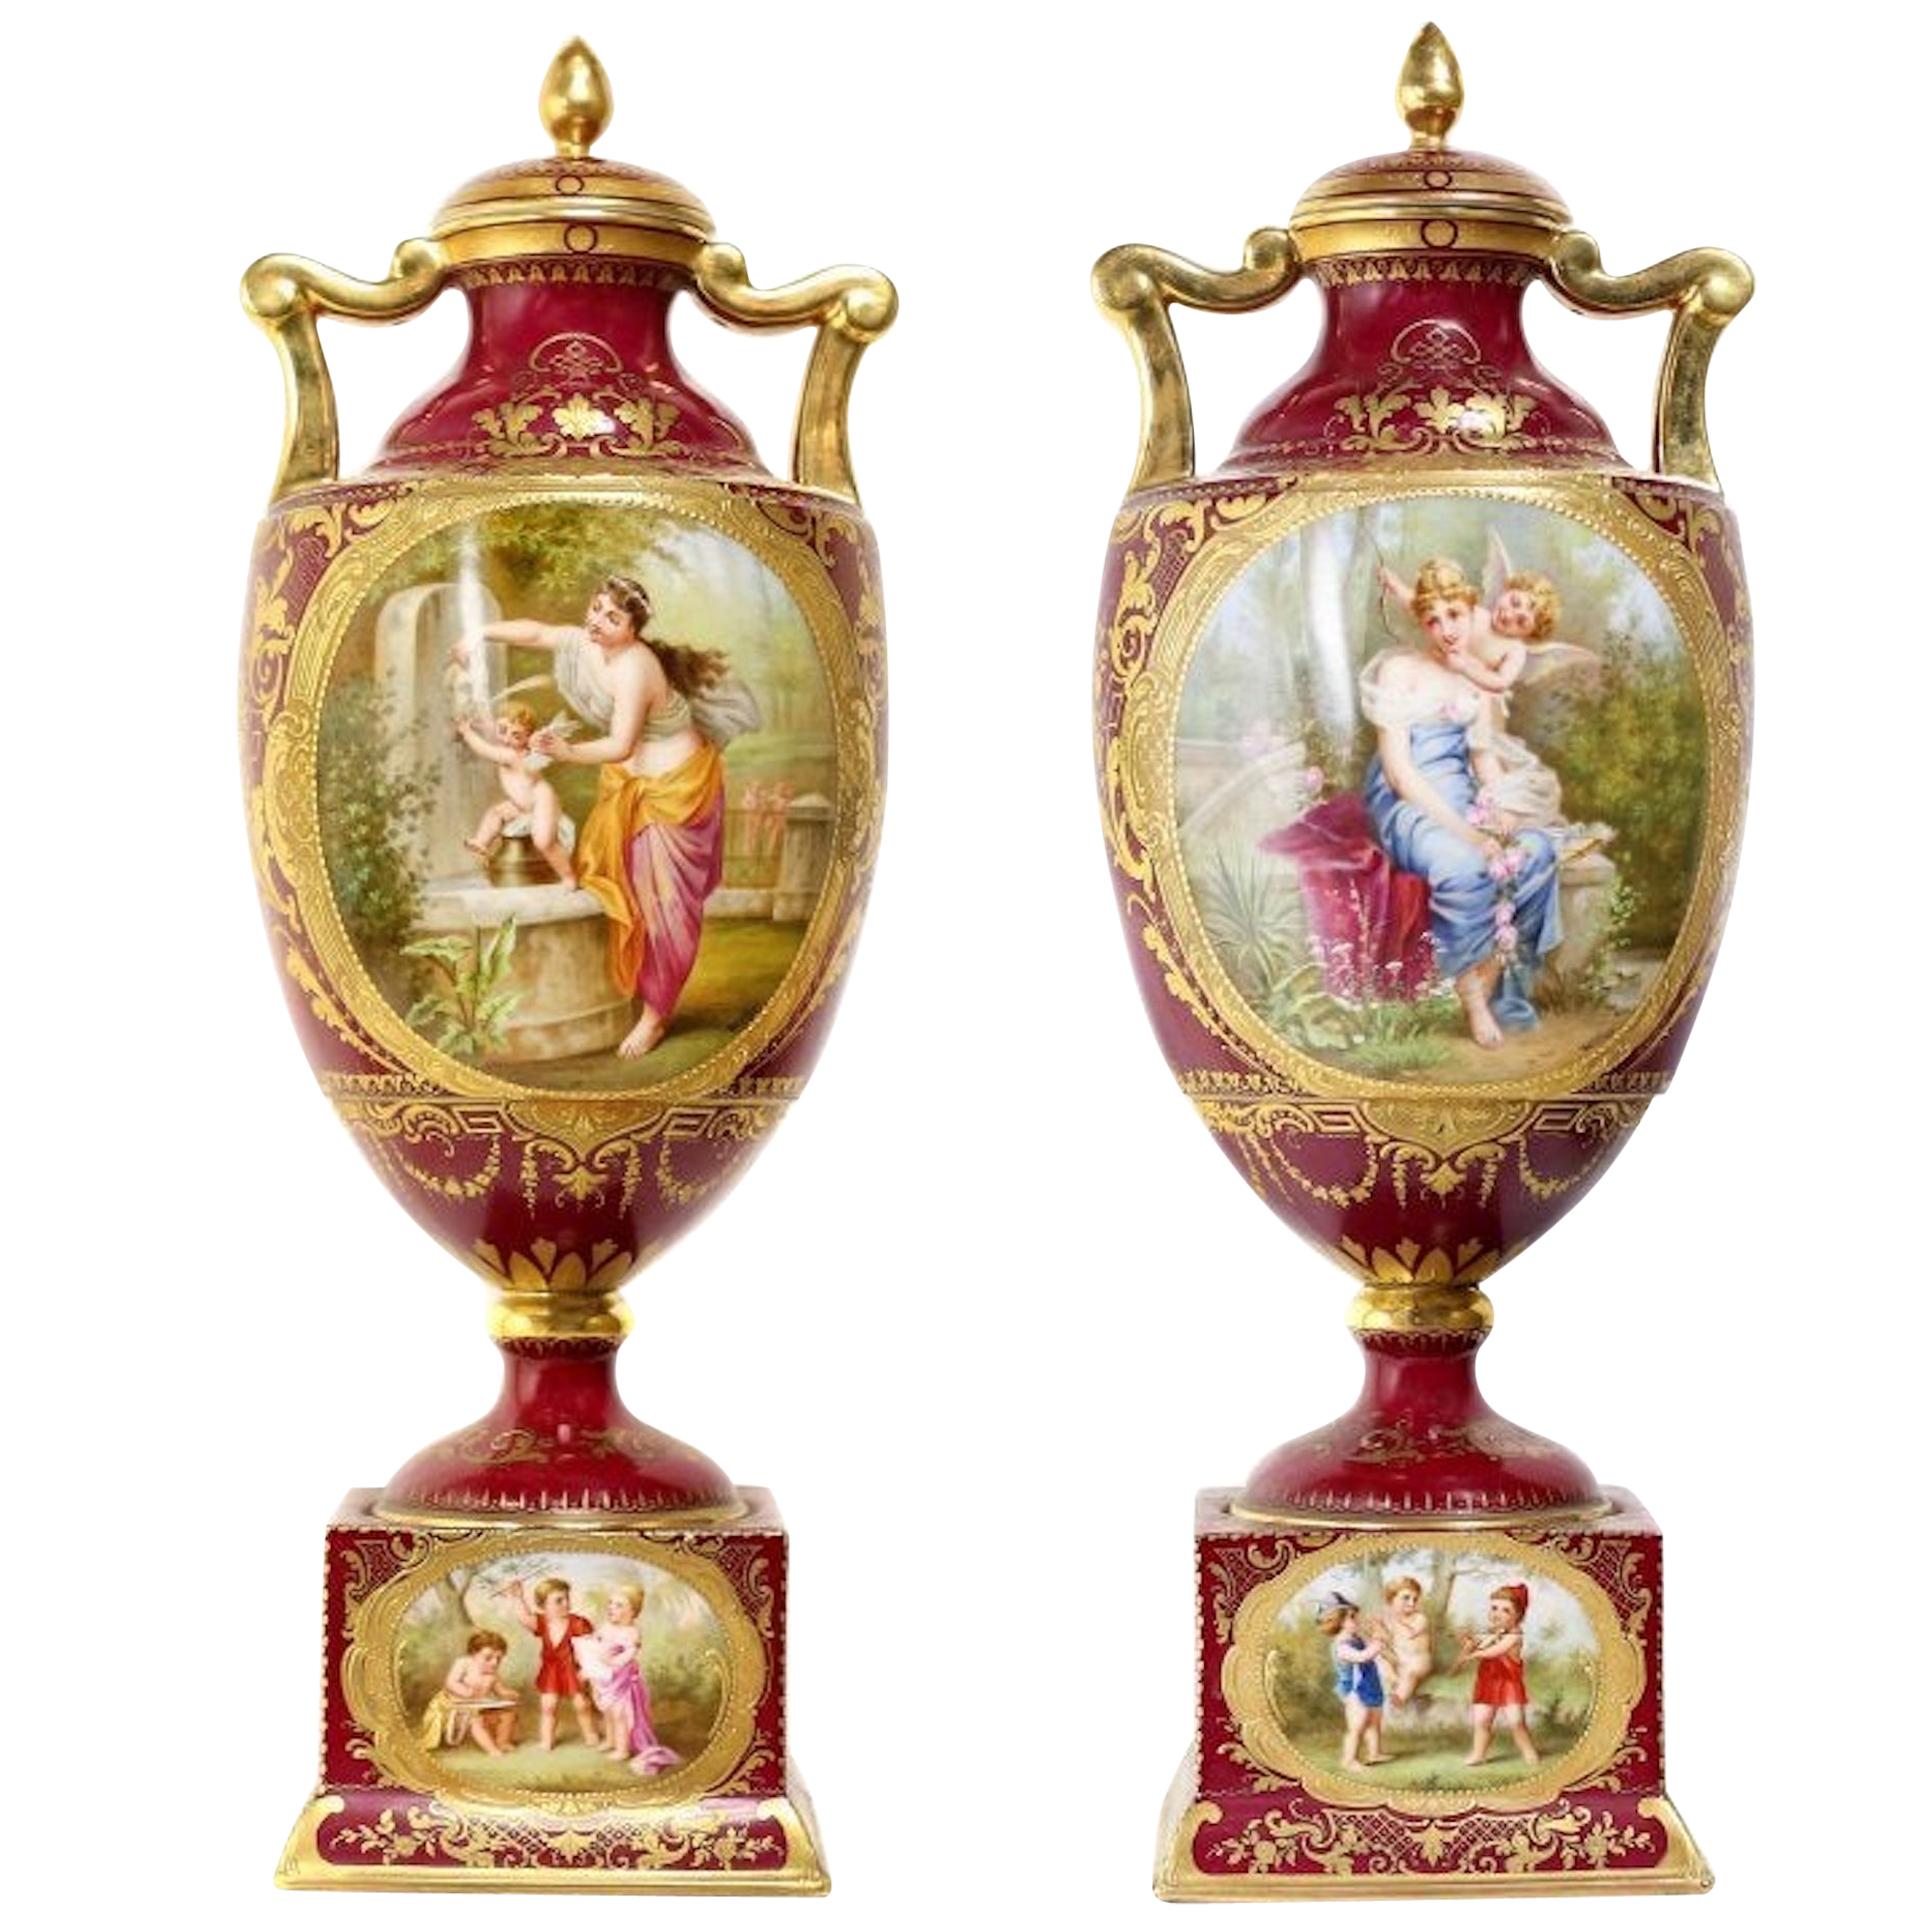 Pair of Vienna Style Covered Urns, Late 19th Century